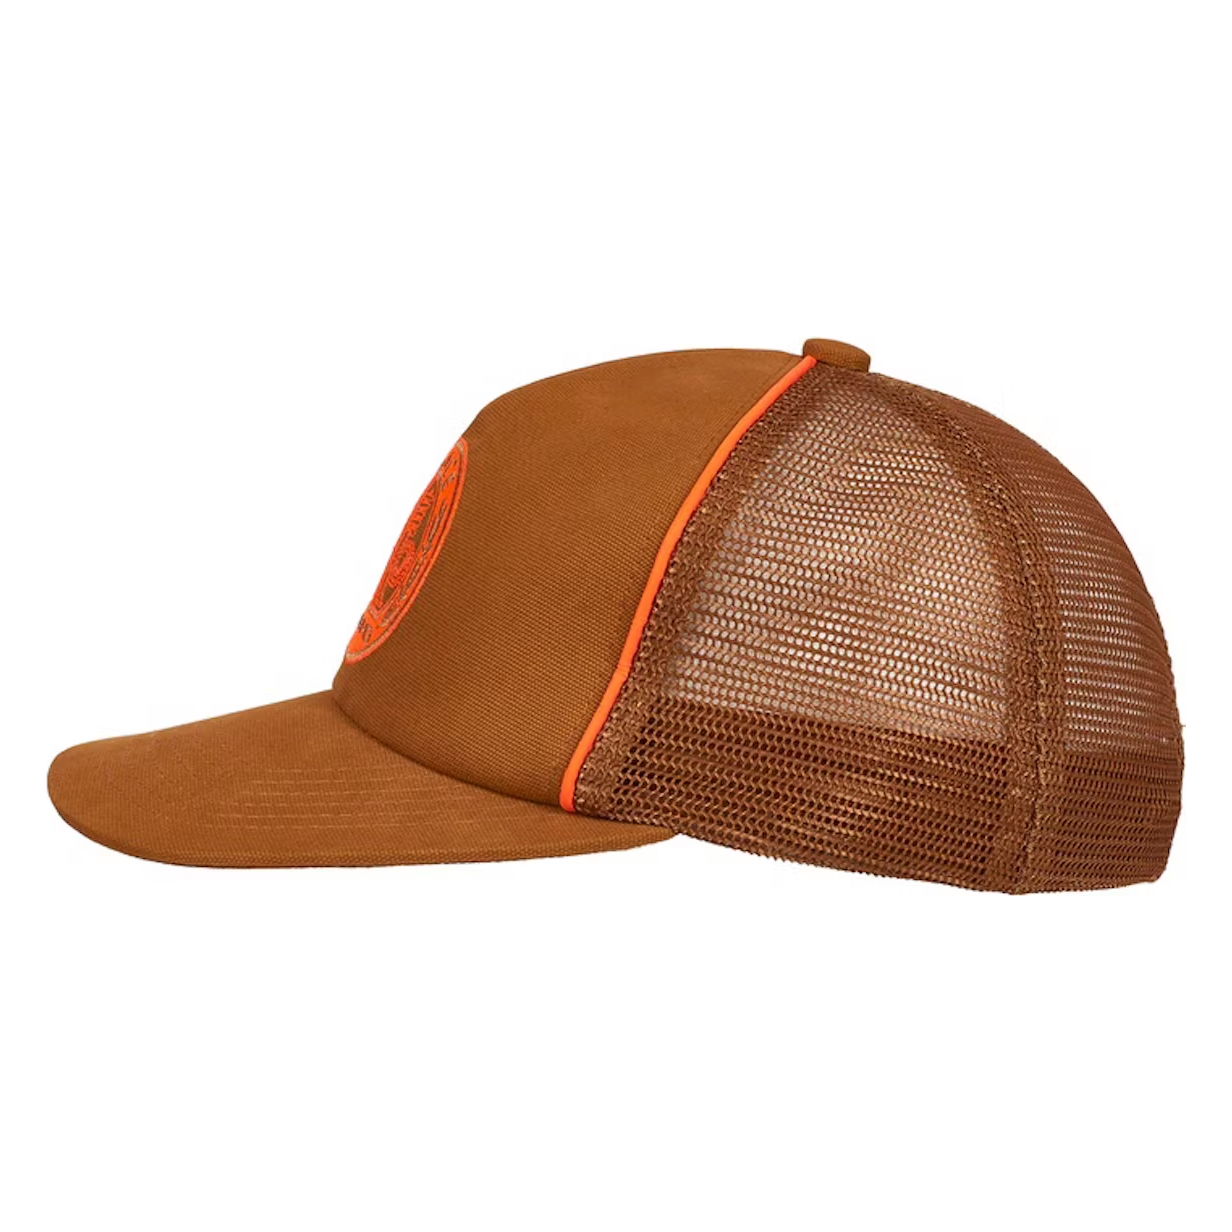 Palace AMG 2.0 Mesh Trucker Cap Caramel by Palace from £48.99